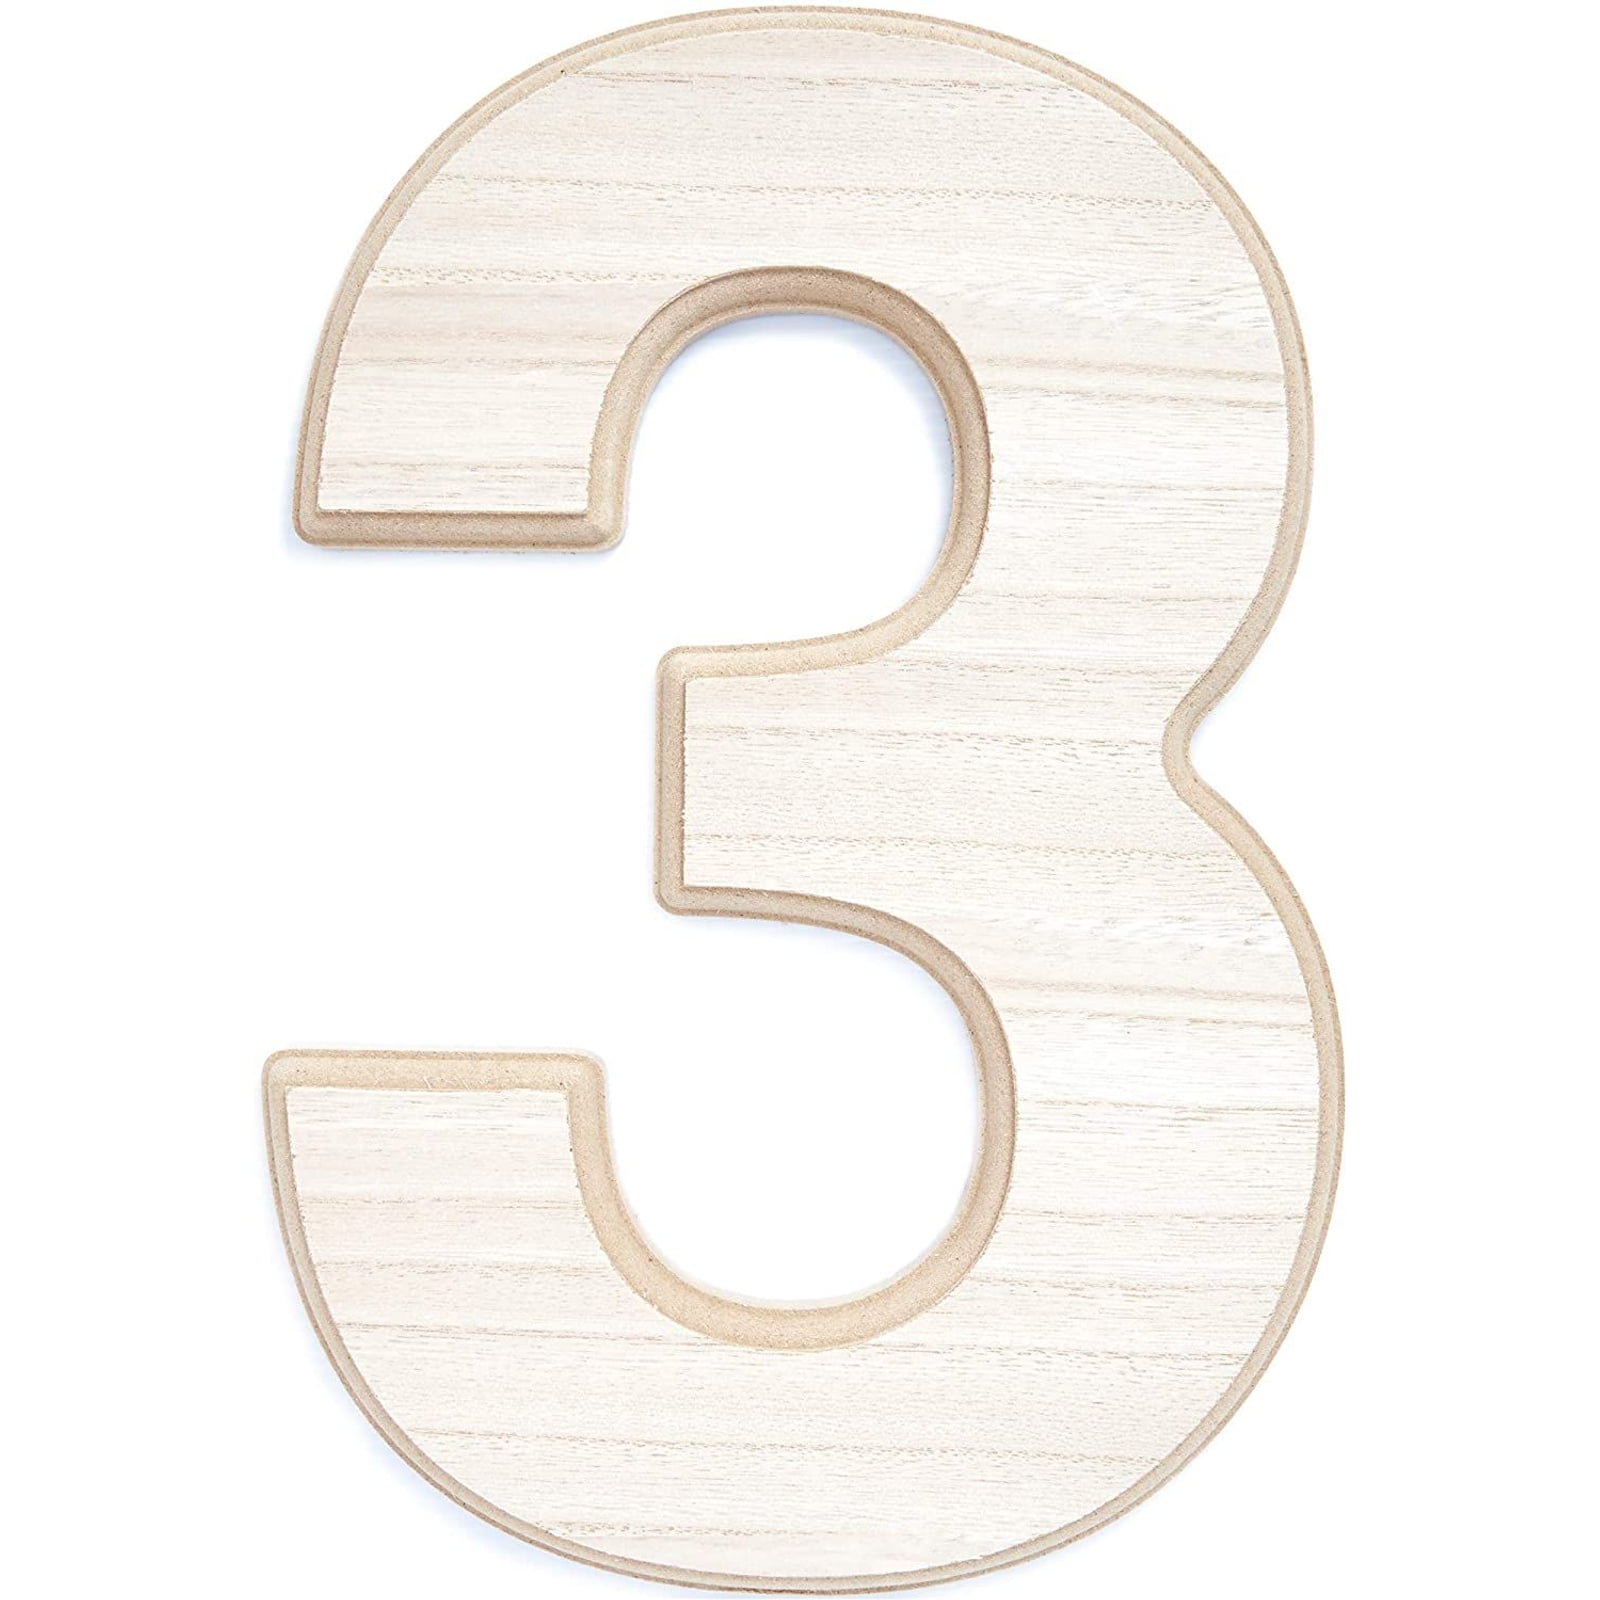 Education Wooden Numbers 1-12 Wood Shapes Embellishments Craft MDF Scrapbook 